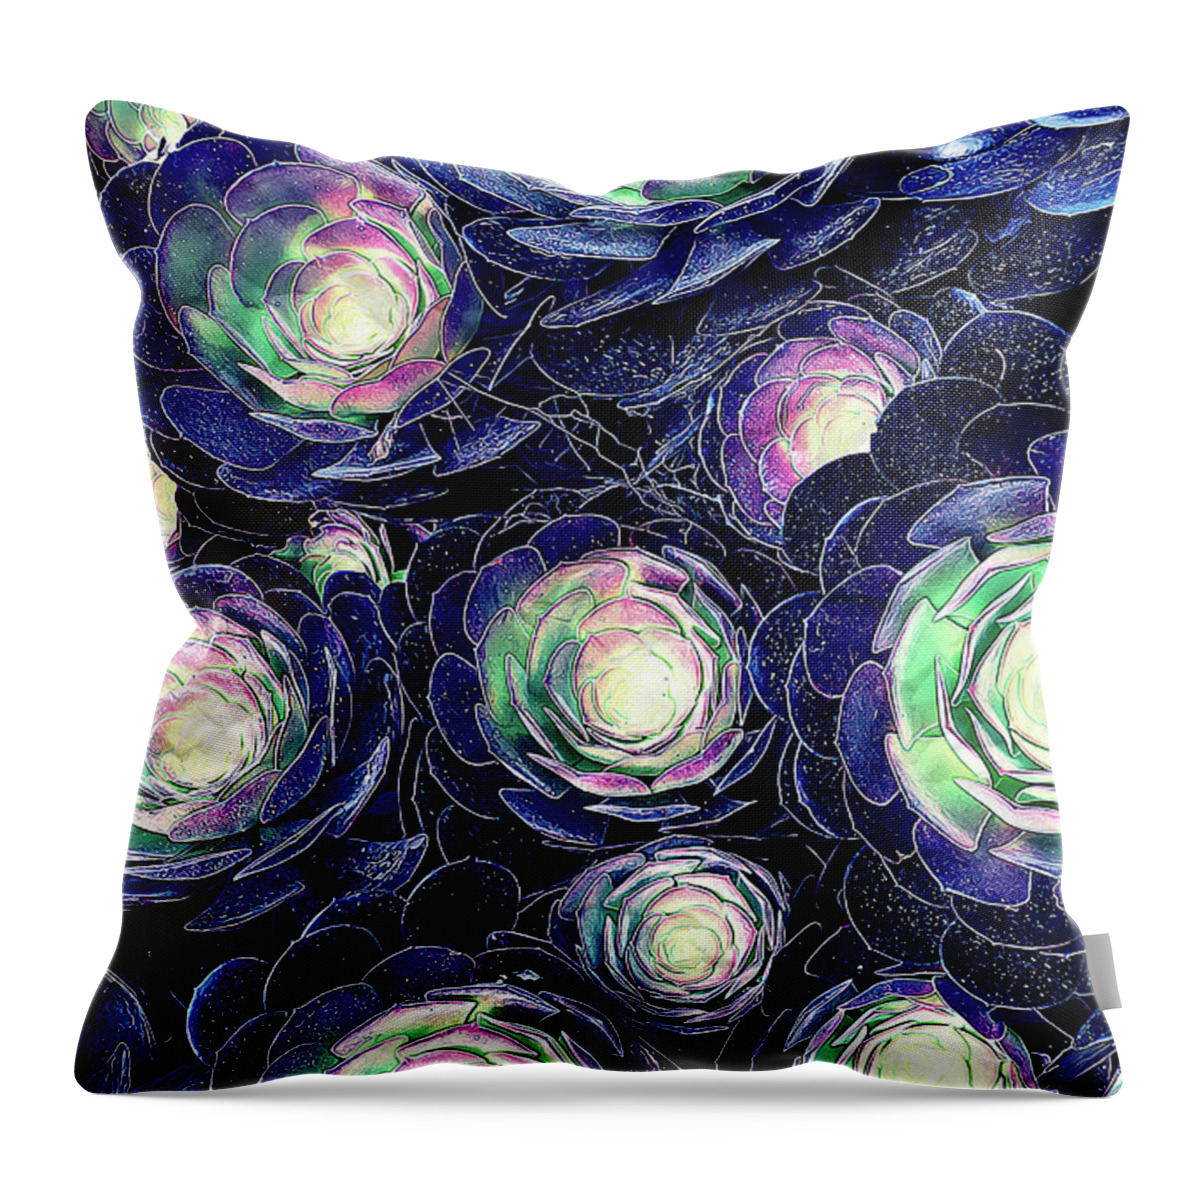 Plants Throw Pillow featuring the digital art Plant Life At Night by Phil Perkins